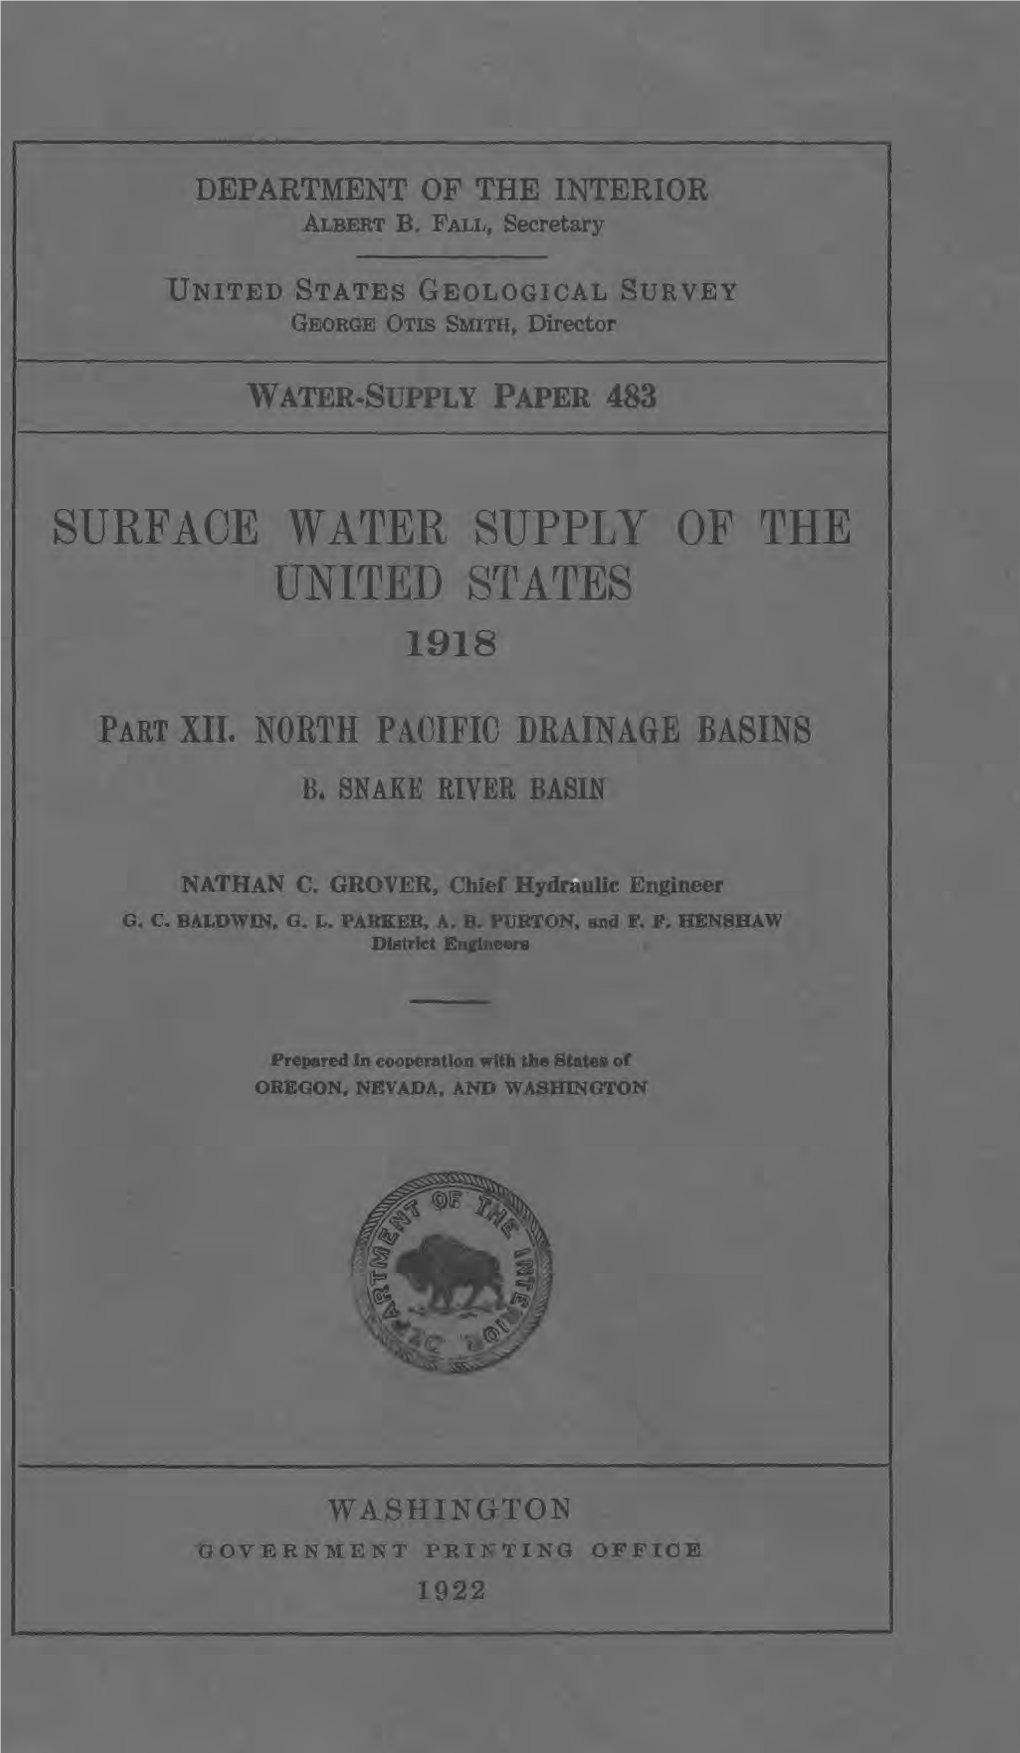 Surface Water Supply of the United States 1918